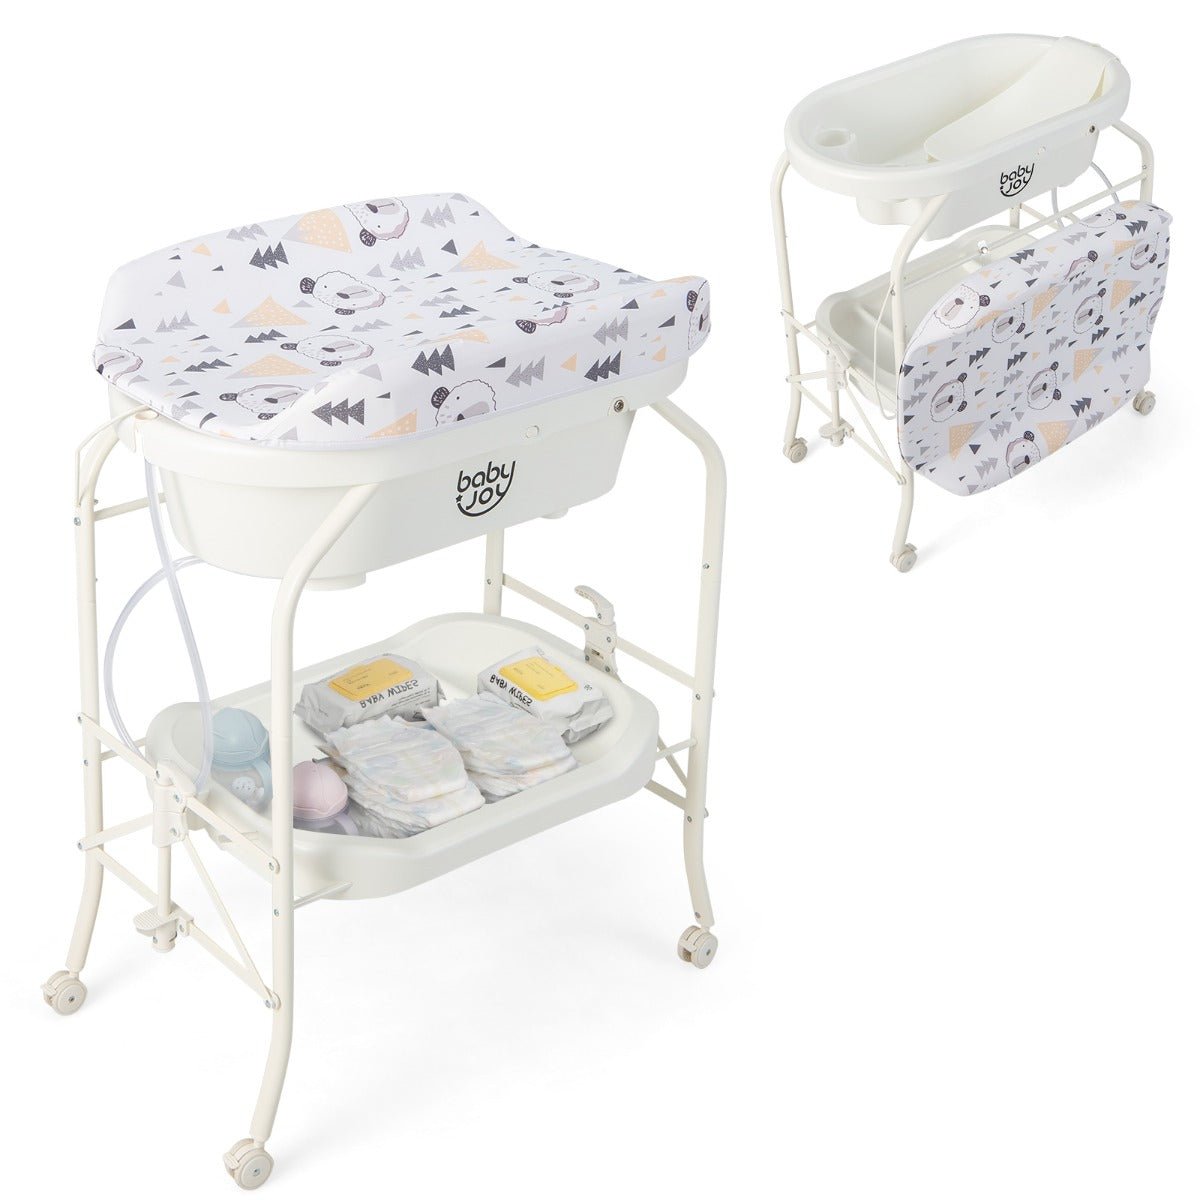 Shop White Portable Baby Changing Table with Bathtub on Wheels